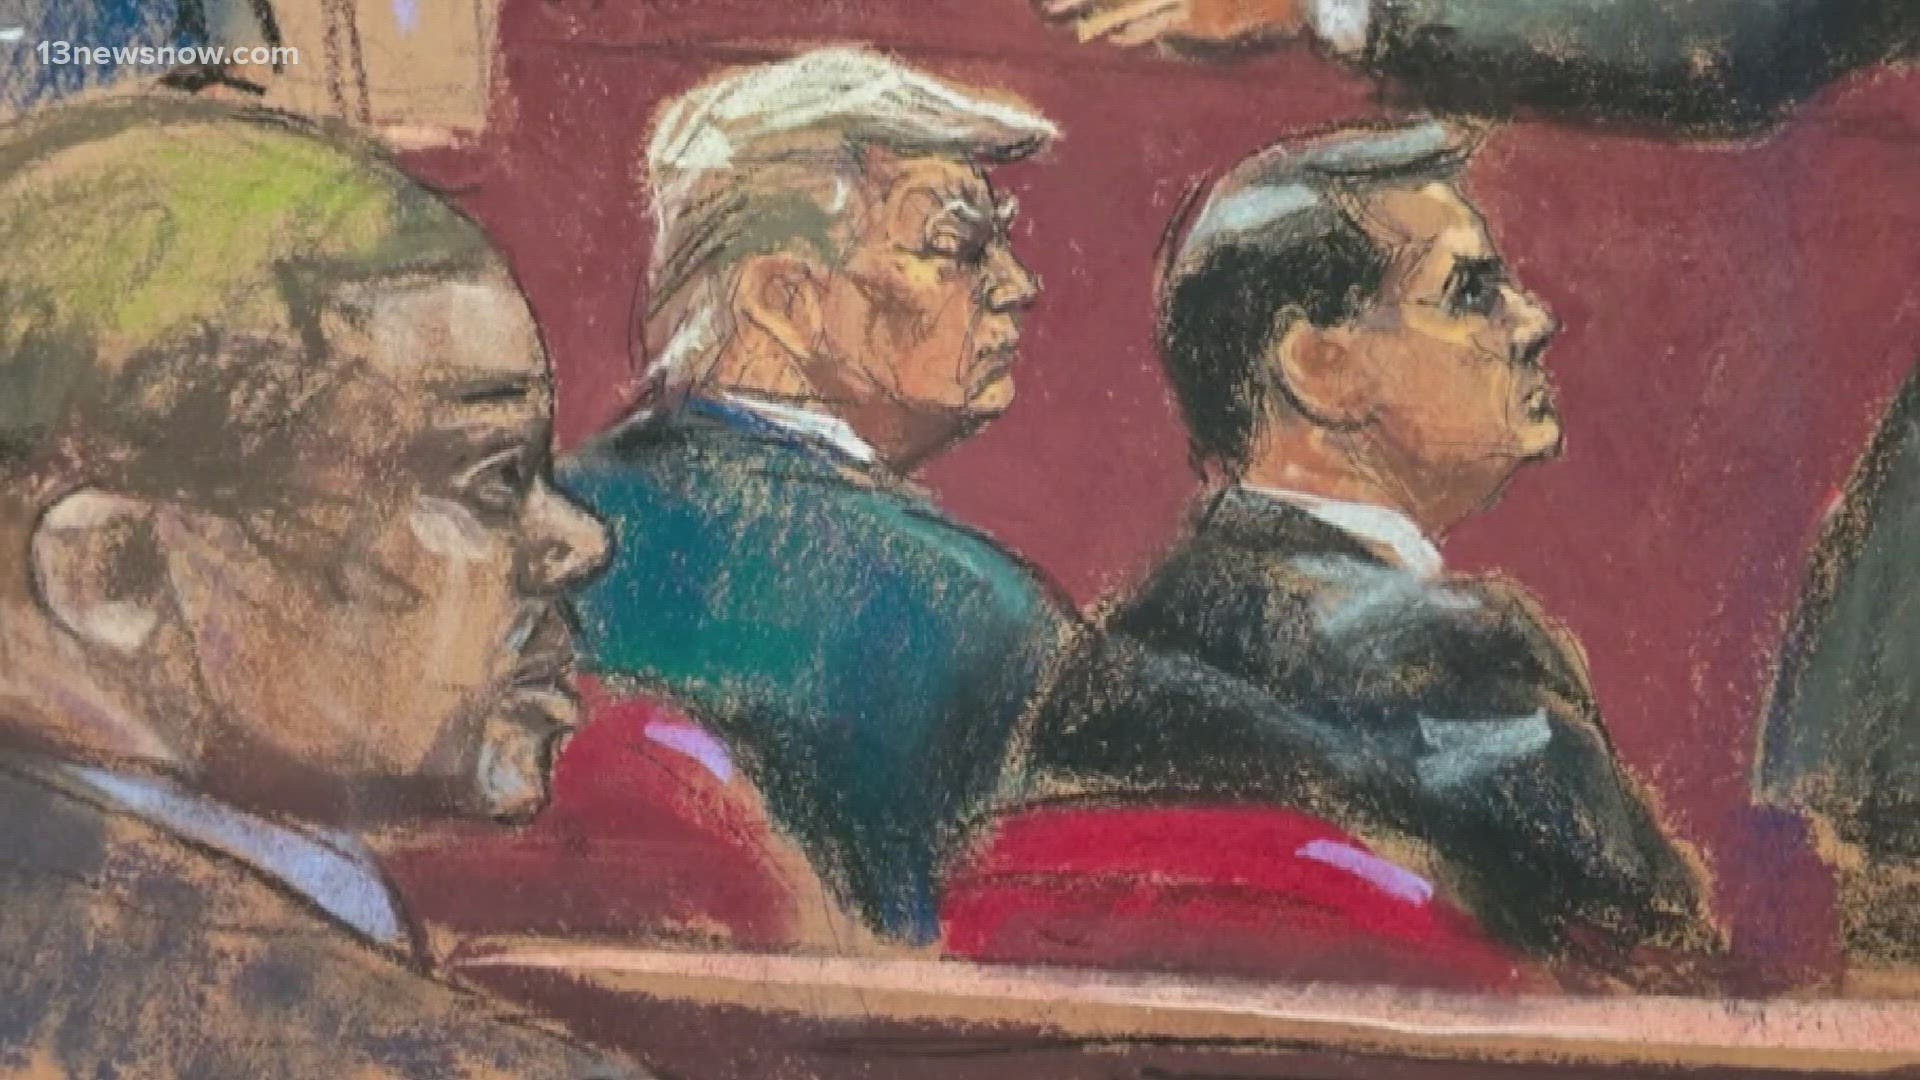 A jury heard opening statements in the criminal hush money trial against former President Donald Trump.